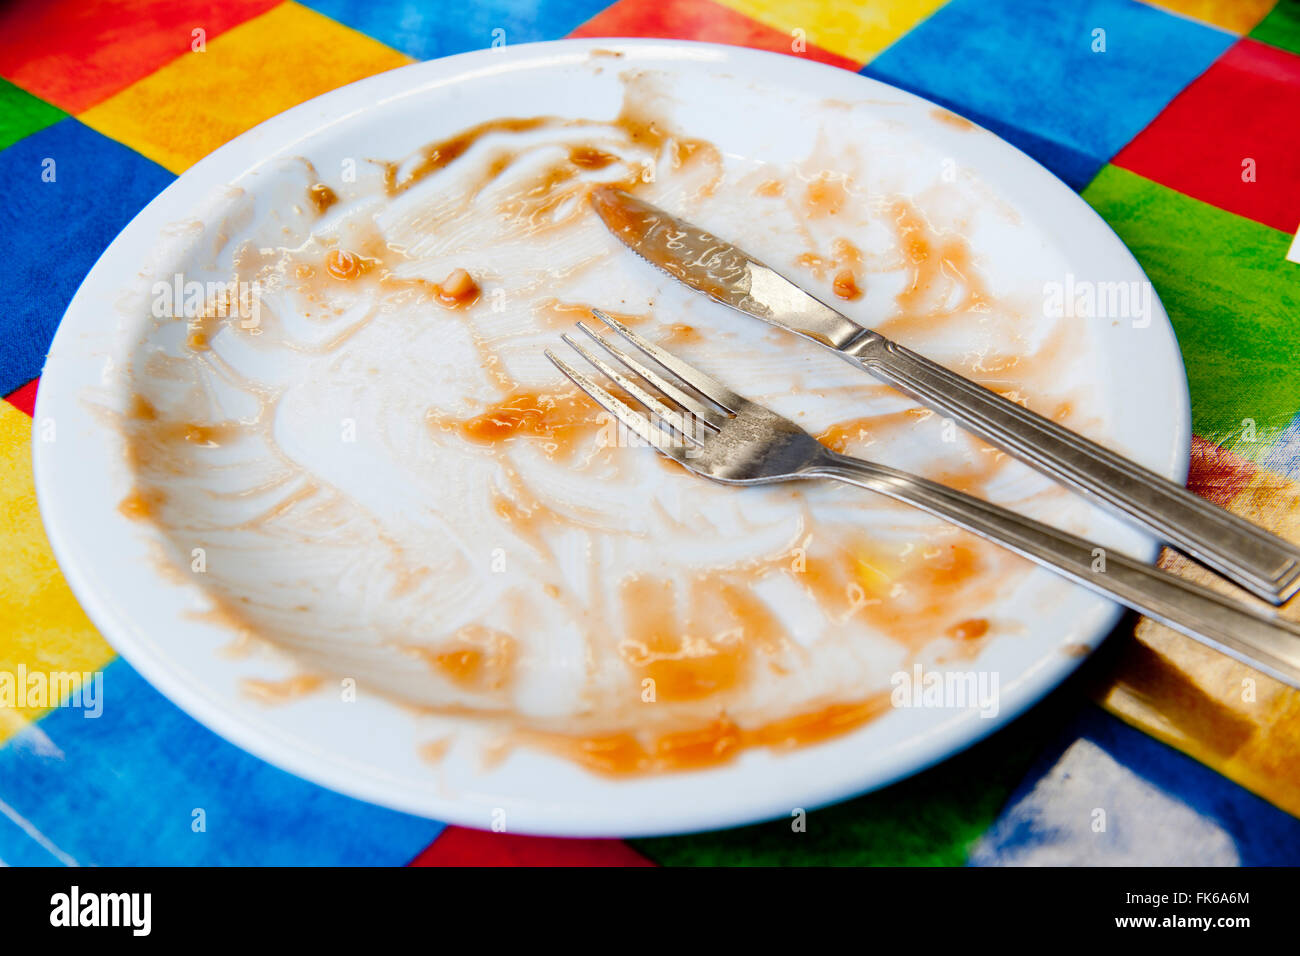 Empty plate after a Full English breakfast, United Kingdom, Europe Stock Photo